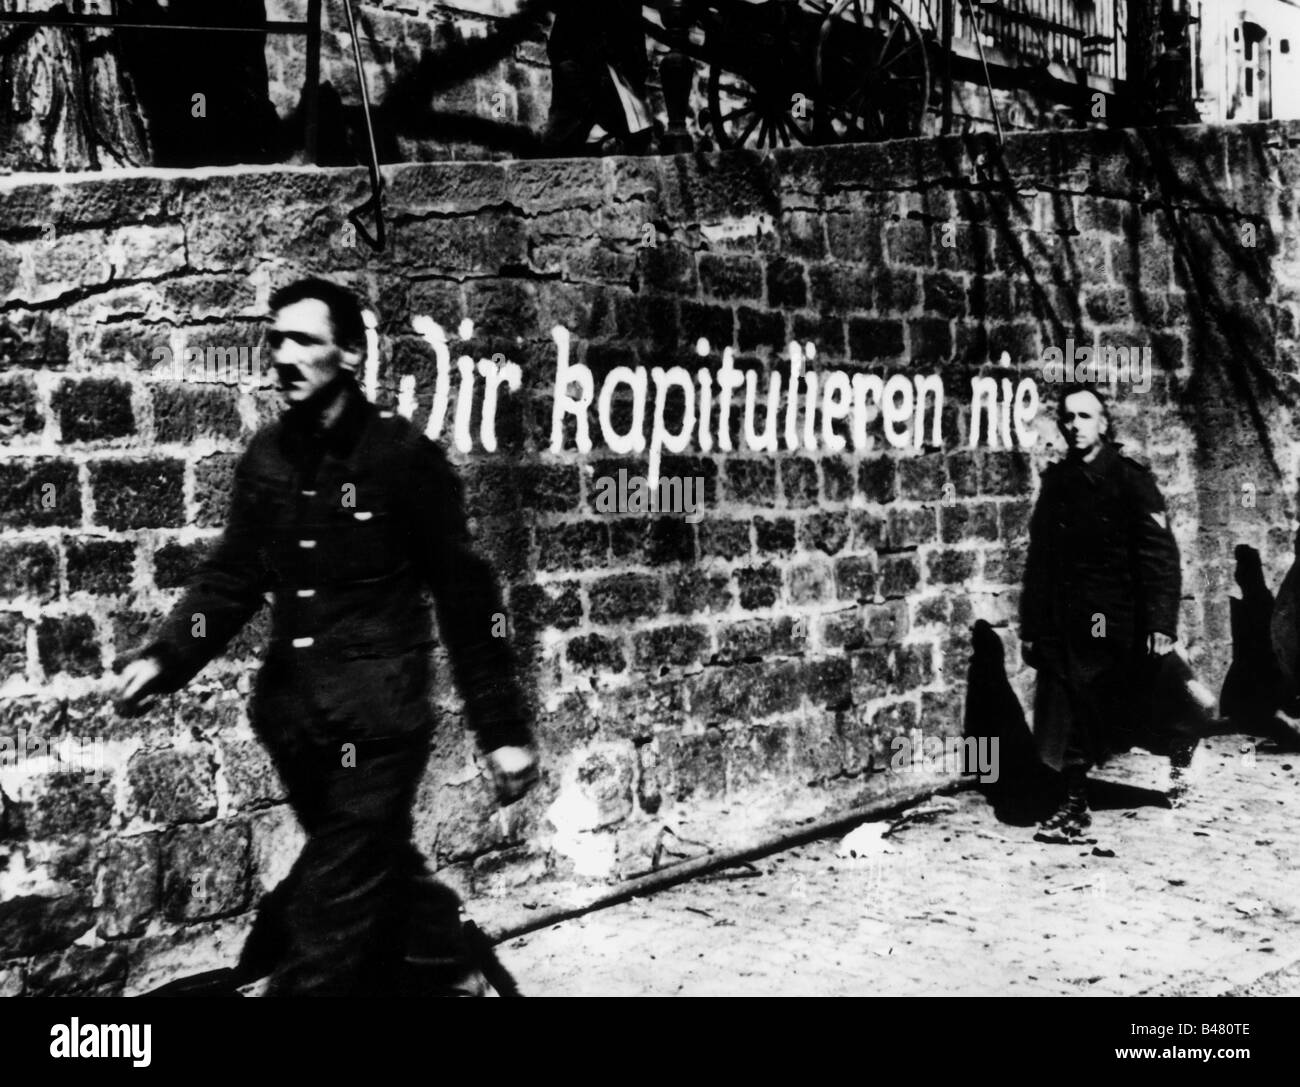 events, Second World War / WWII, Germany, slogan "We will never surrender", 1945, Stock Photo